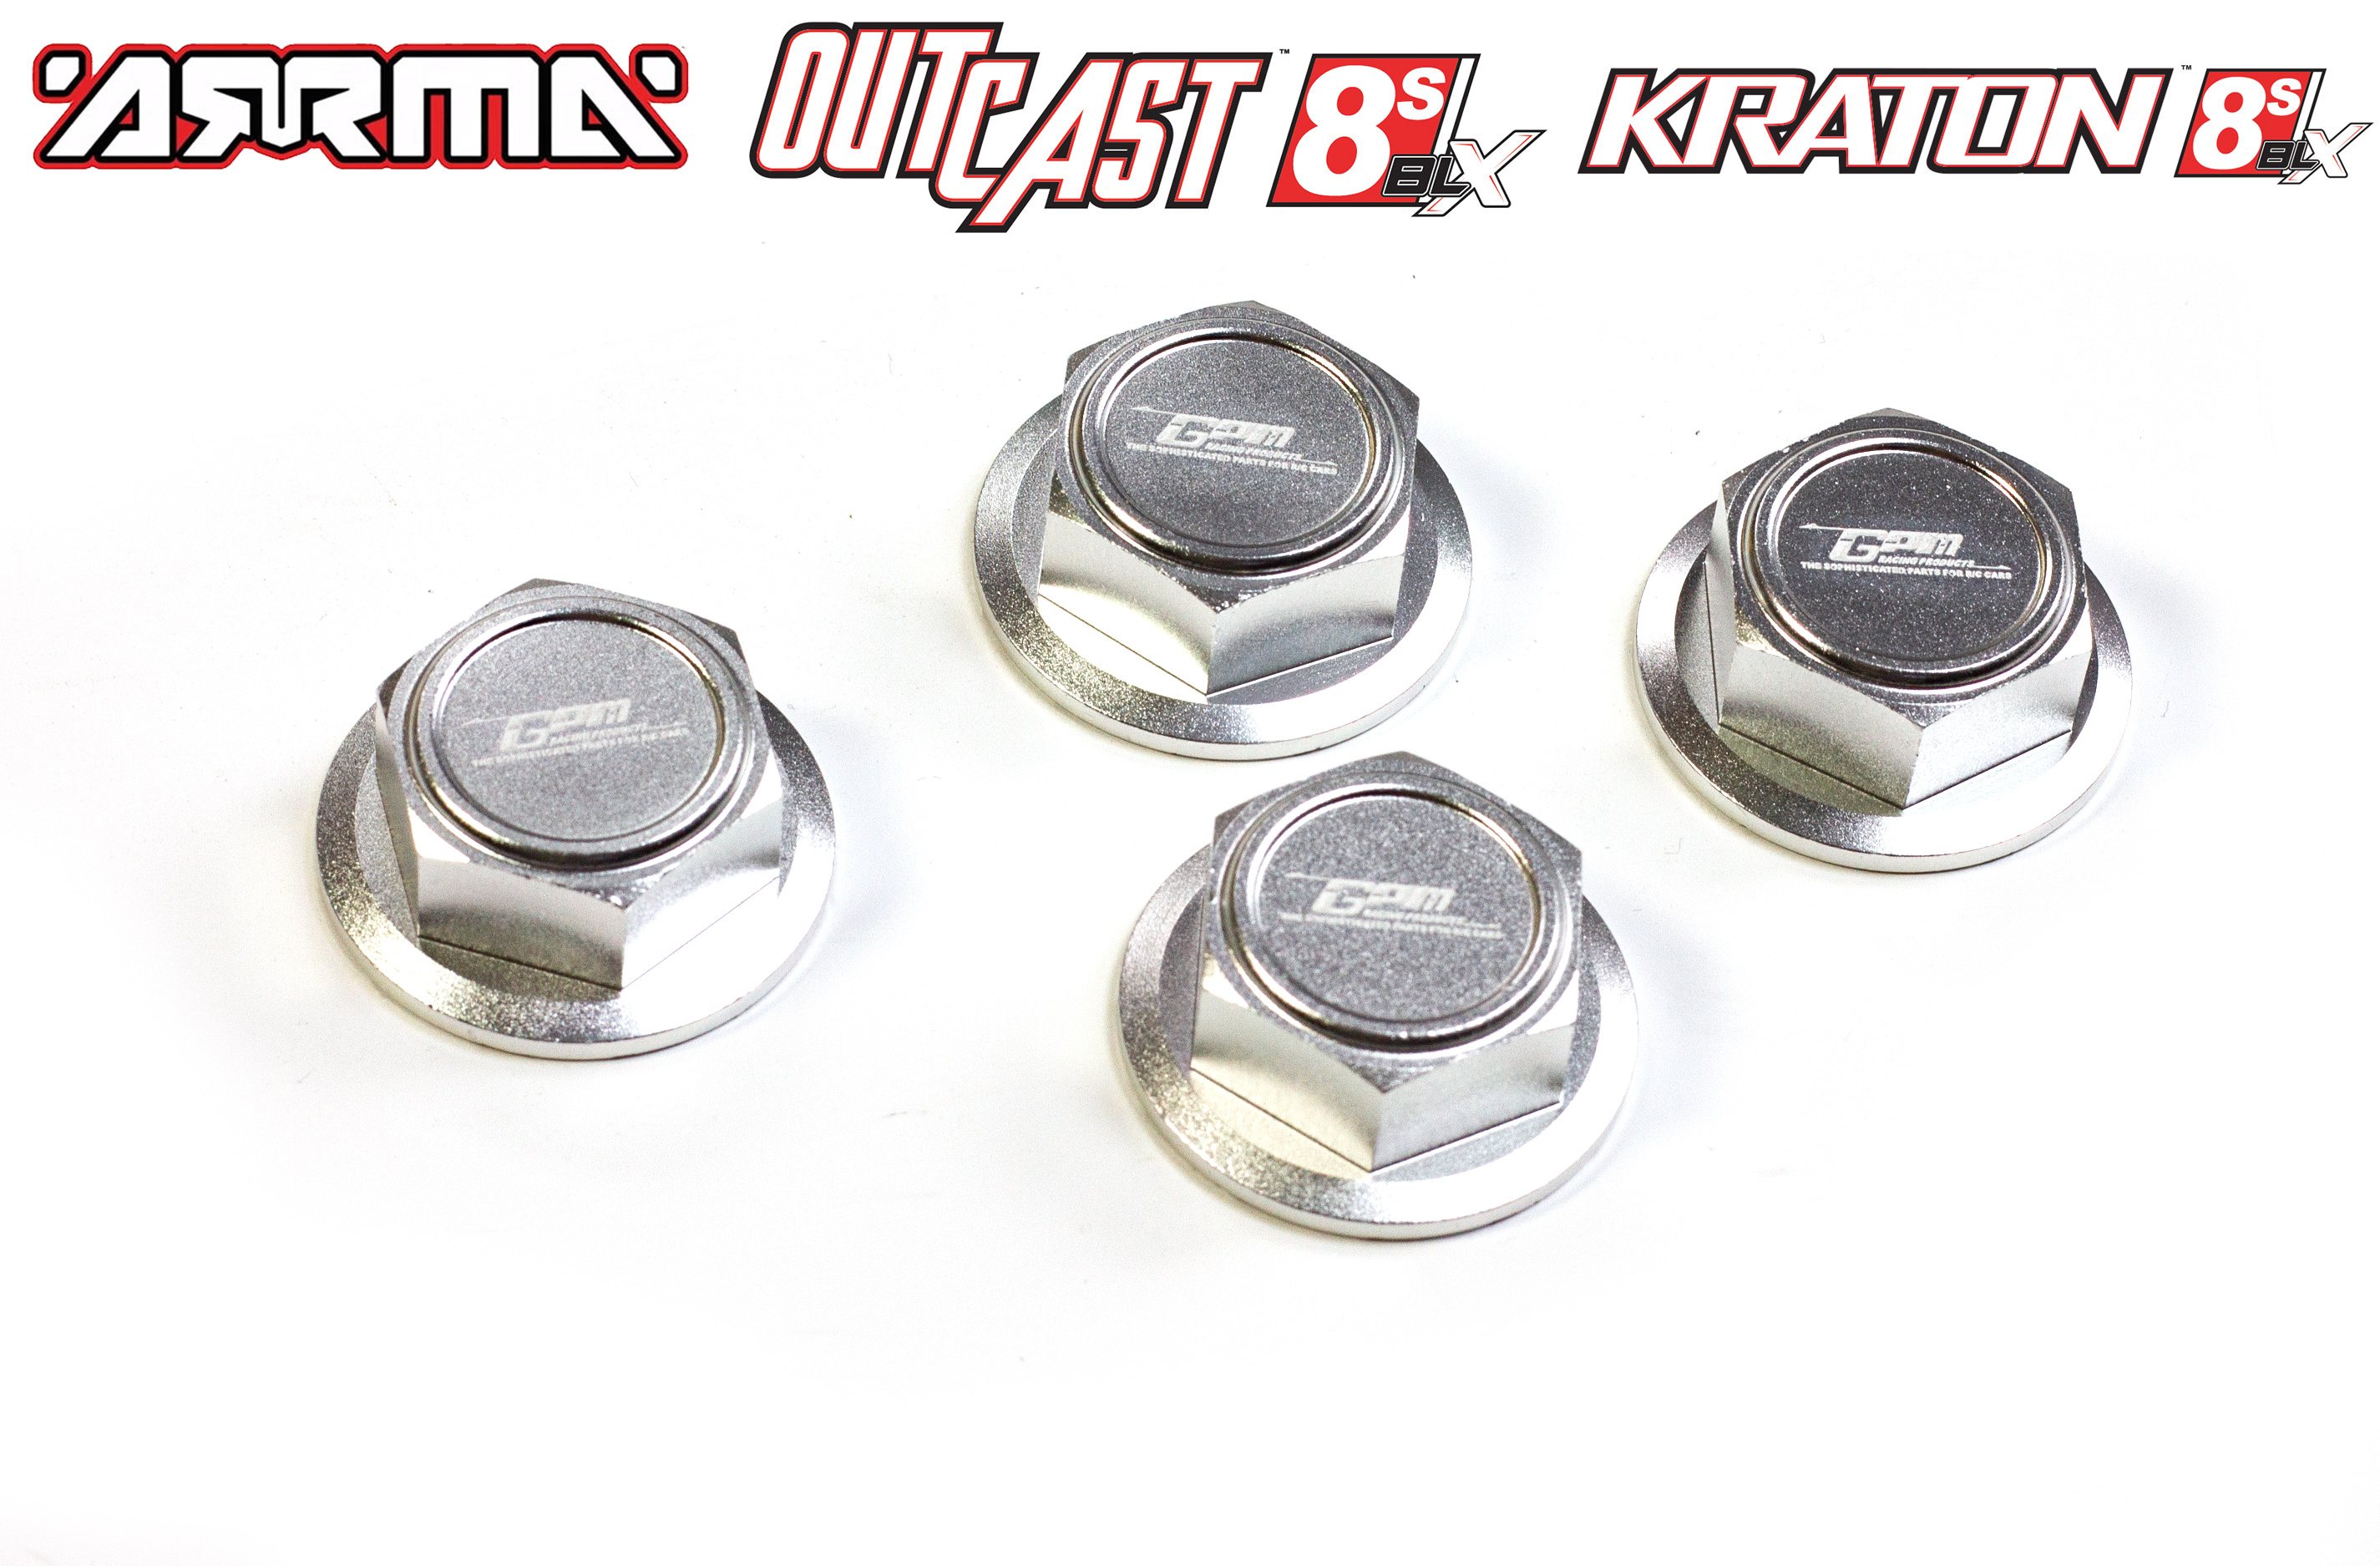 AKX005 GPM Closed wheel nuts for Arrma Kraton/Outcast 8S